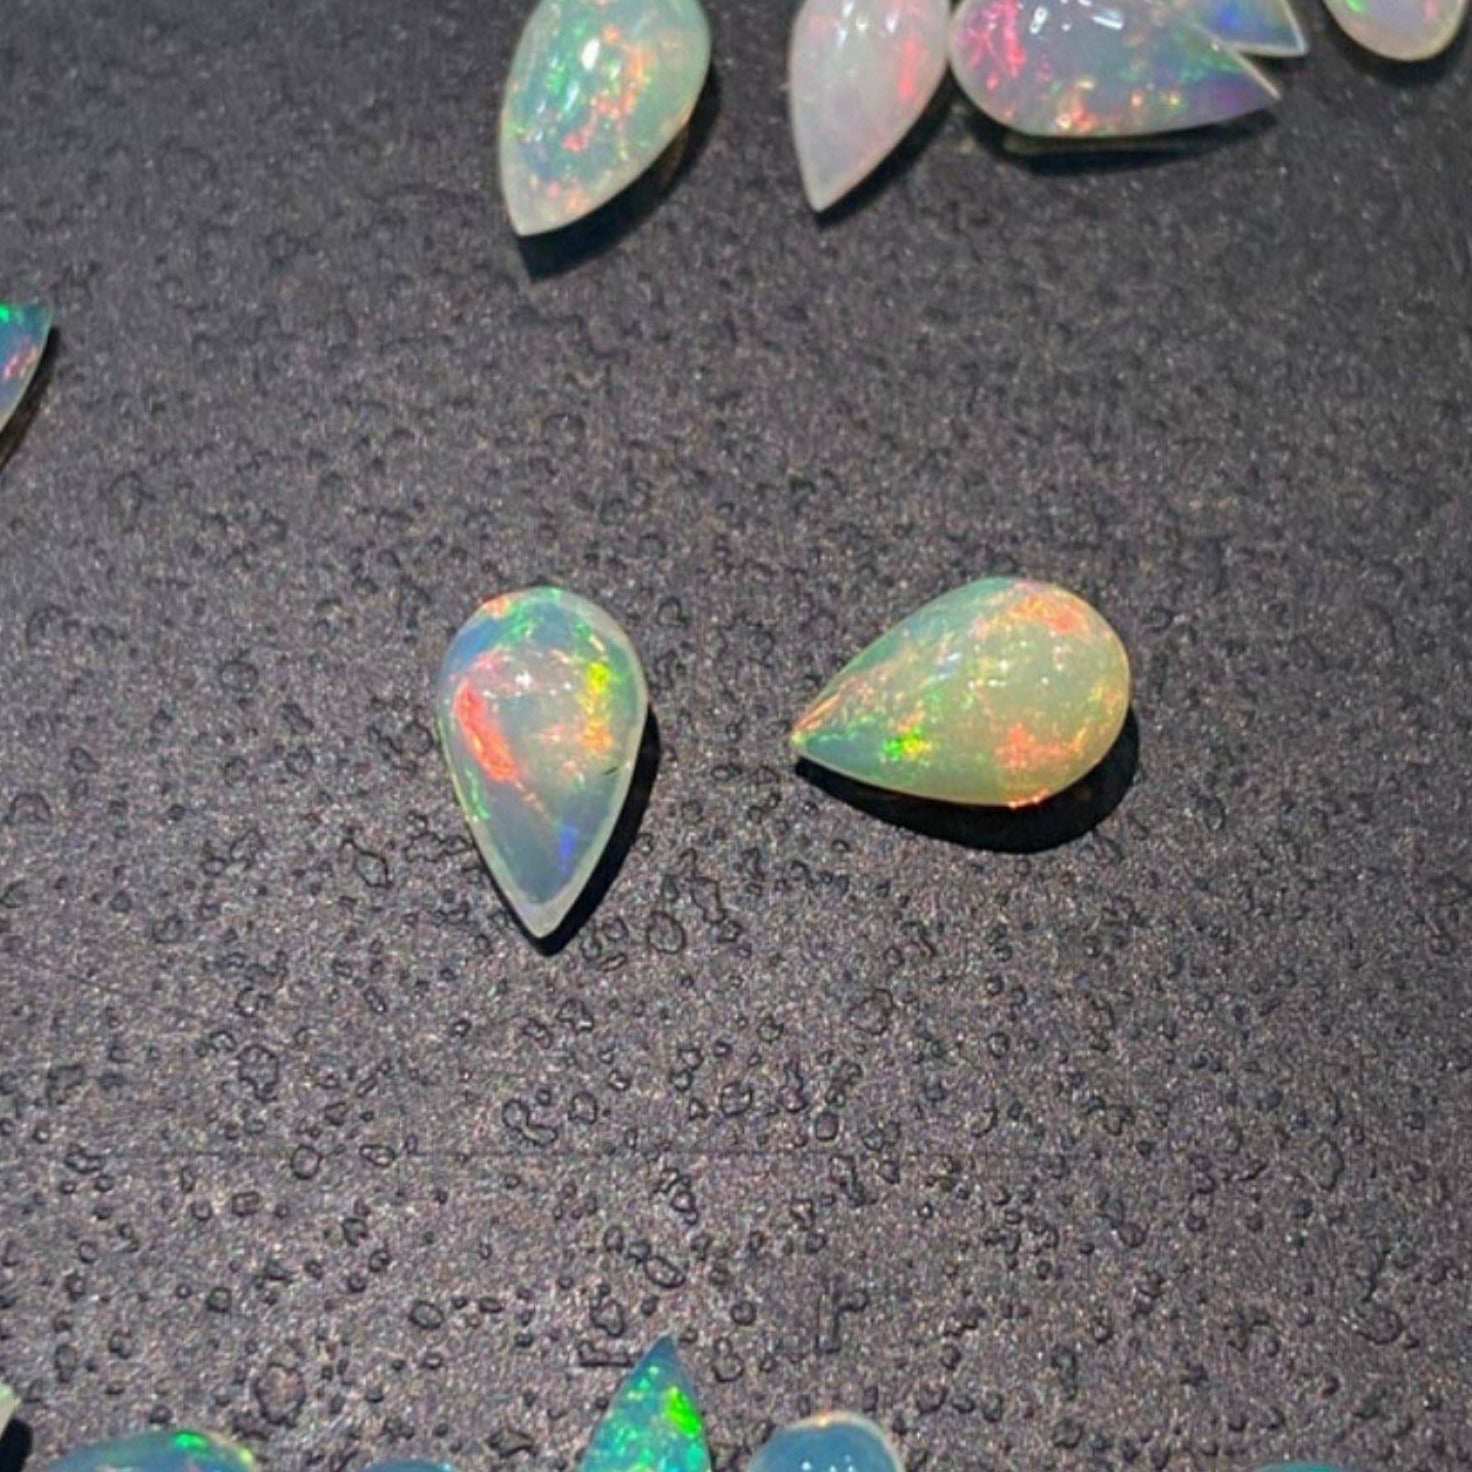 40 Pcs Opal Drops 5-8mm | Top Drilled | High Quality Ethiopian Mined - The LabradoriteKing